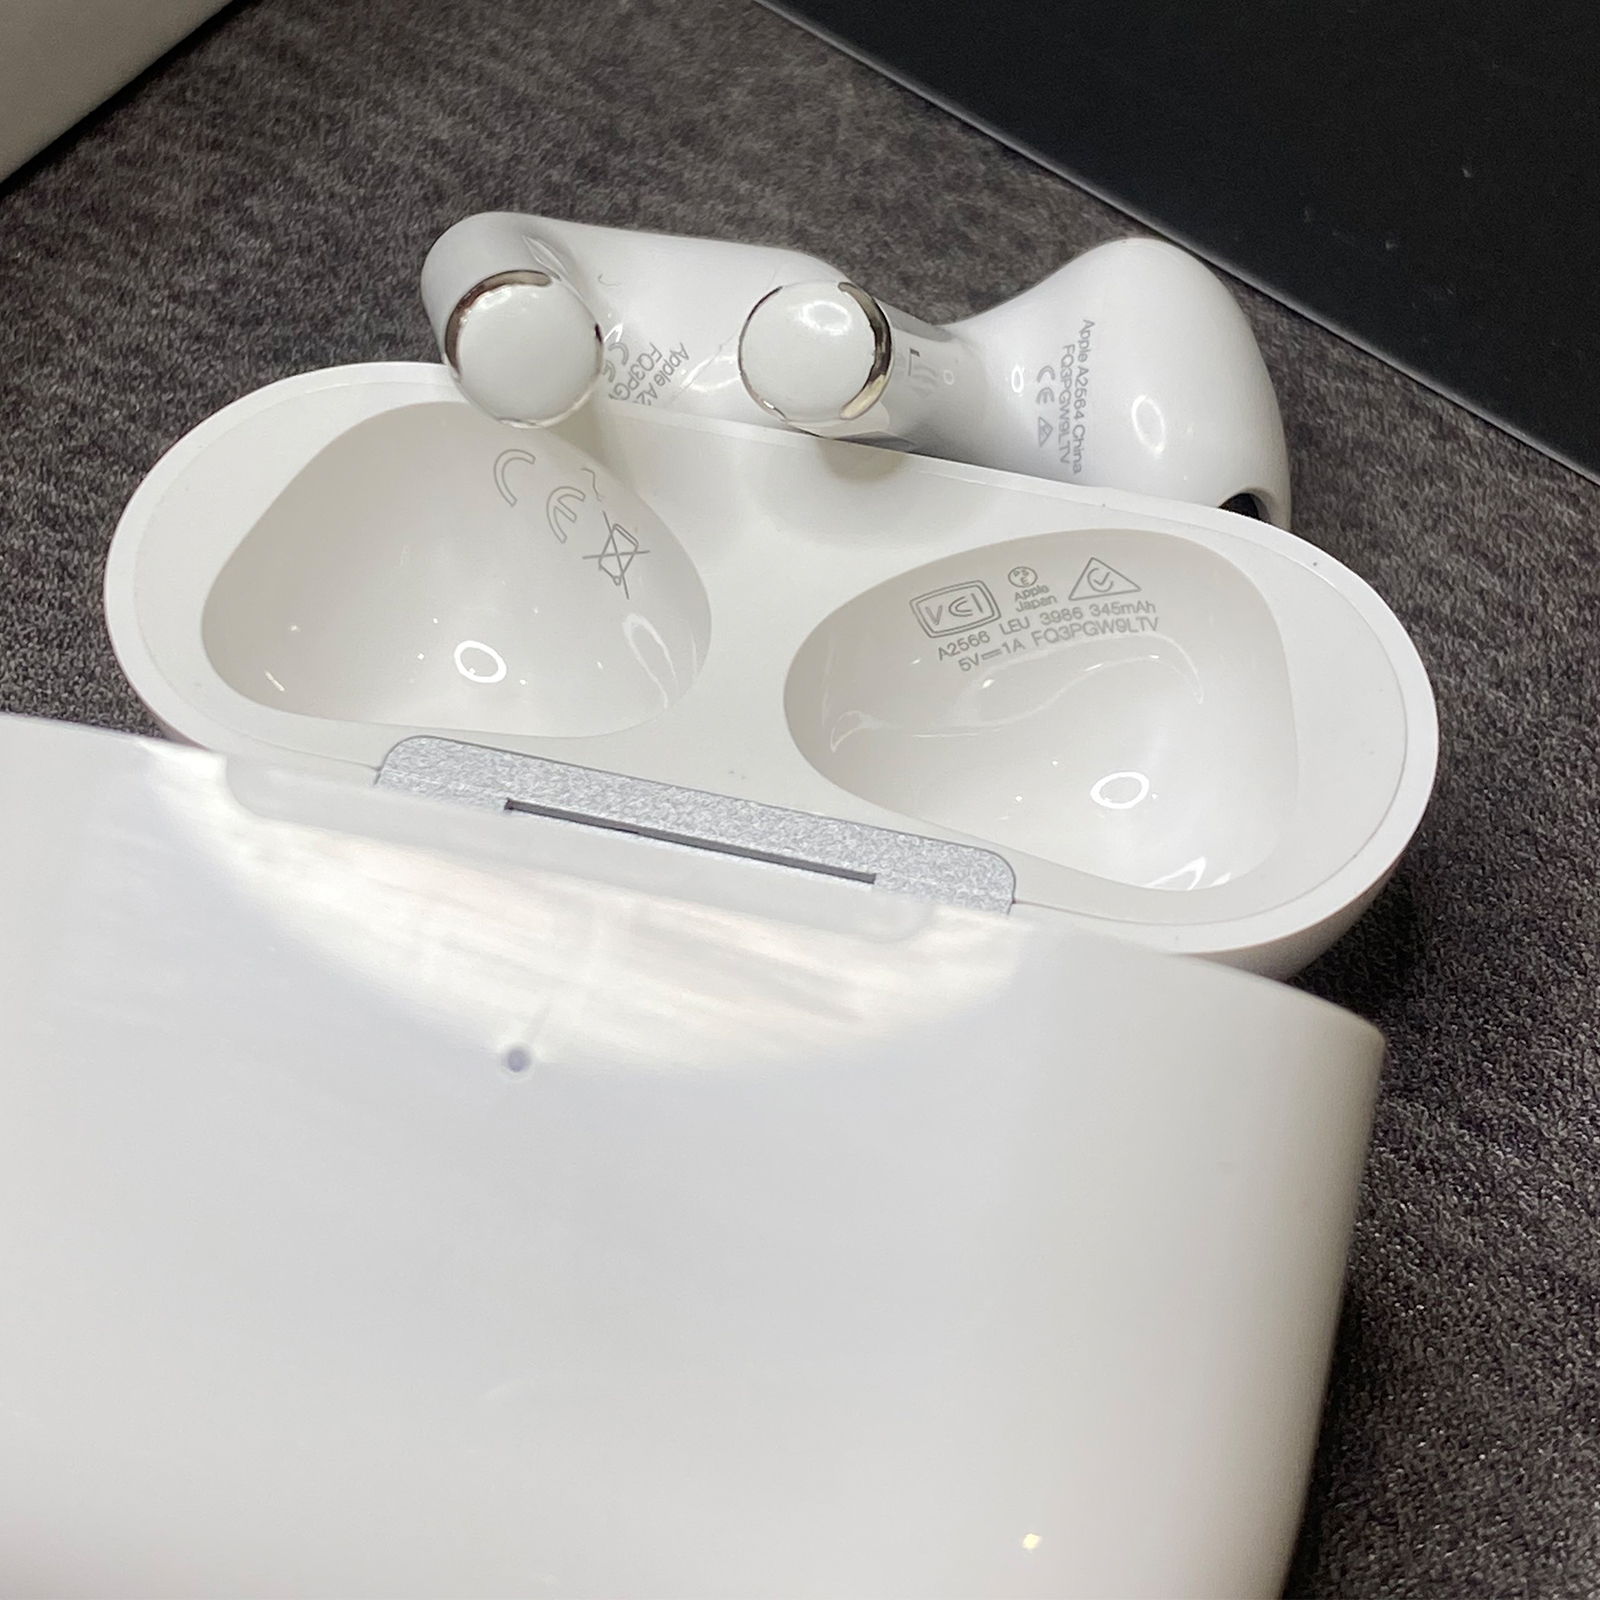 AirPods3